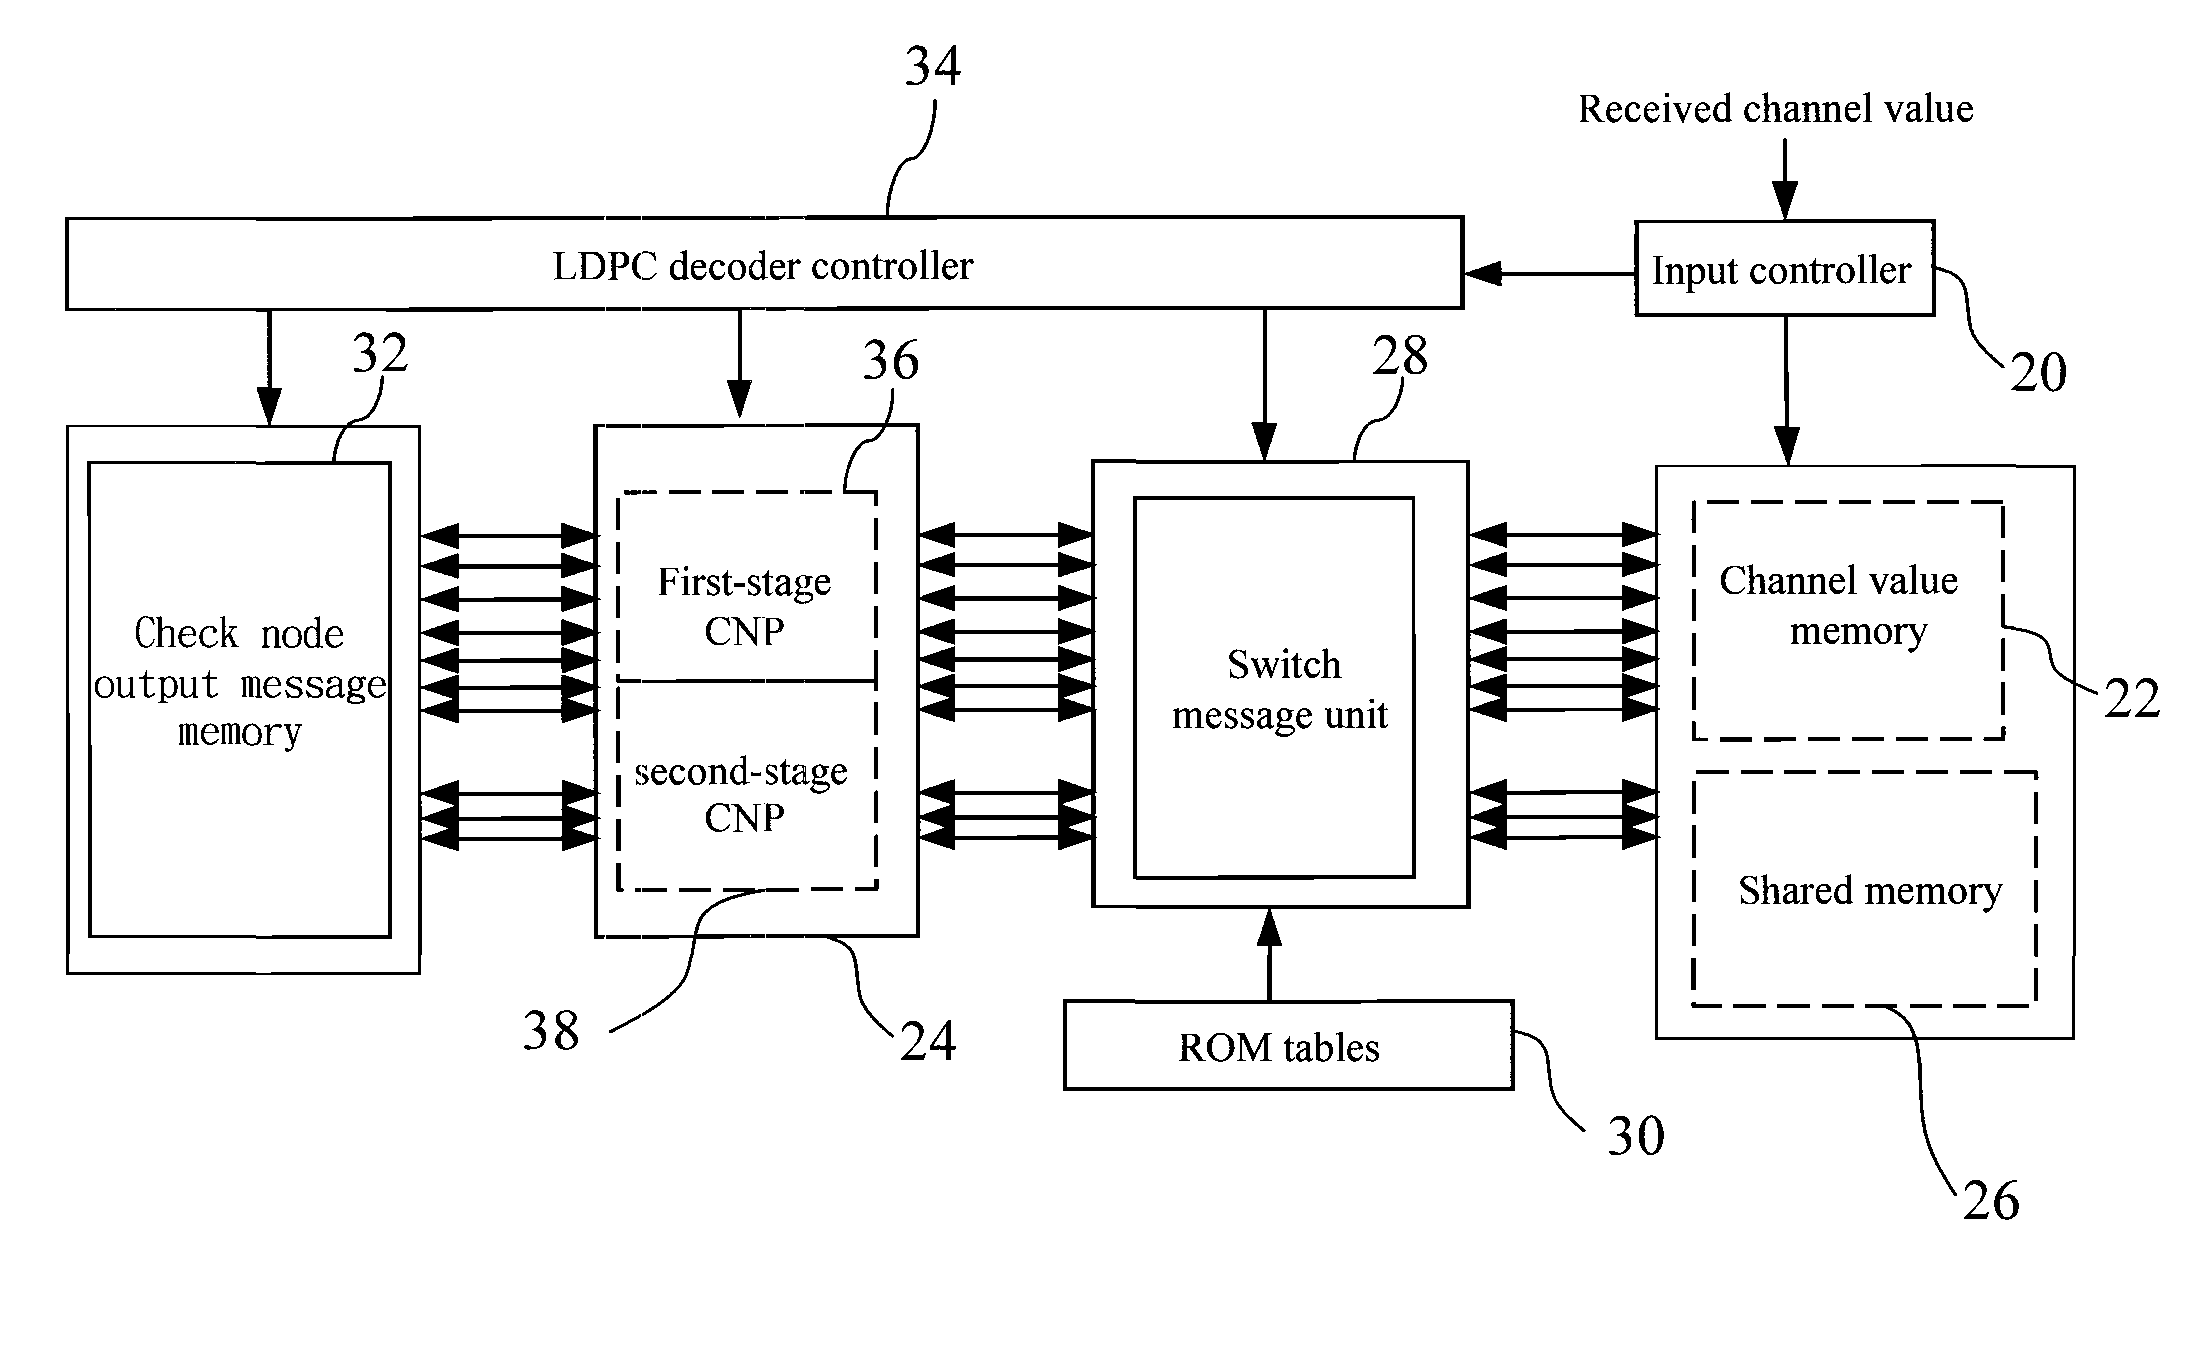 Operating method and circuit for low density parity check (LDPC) decoder